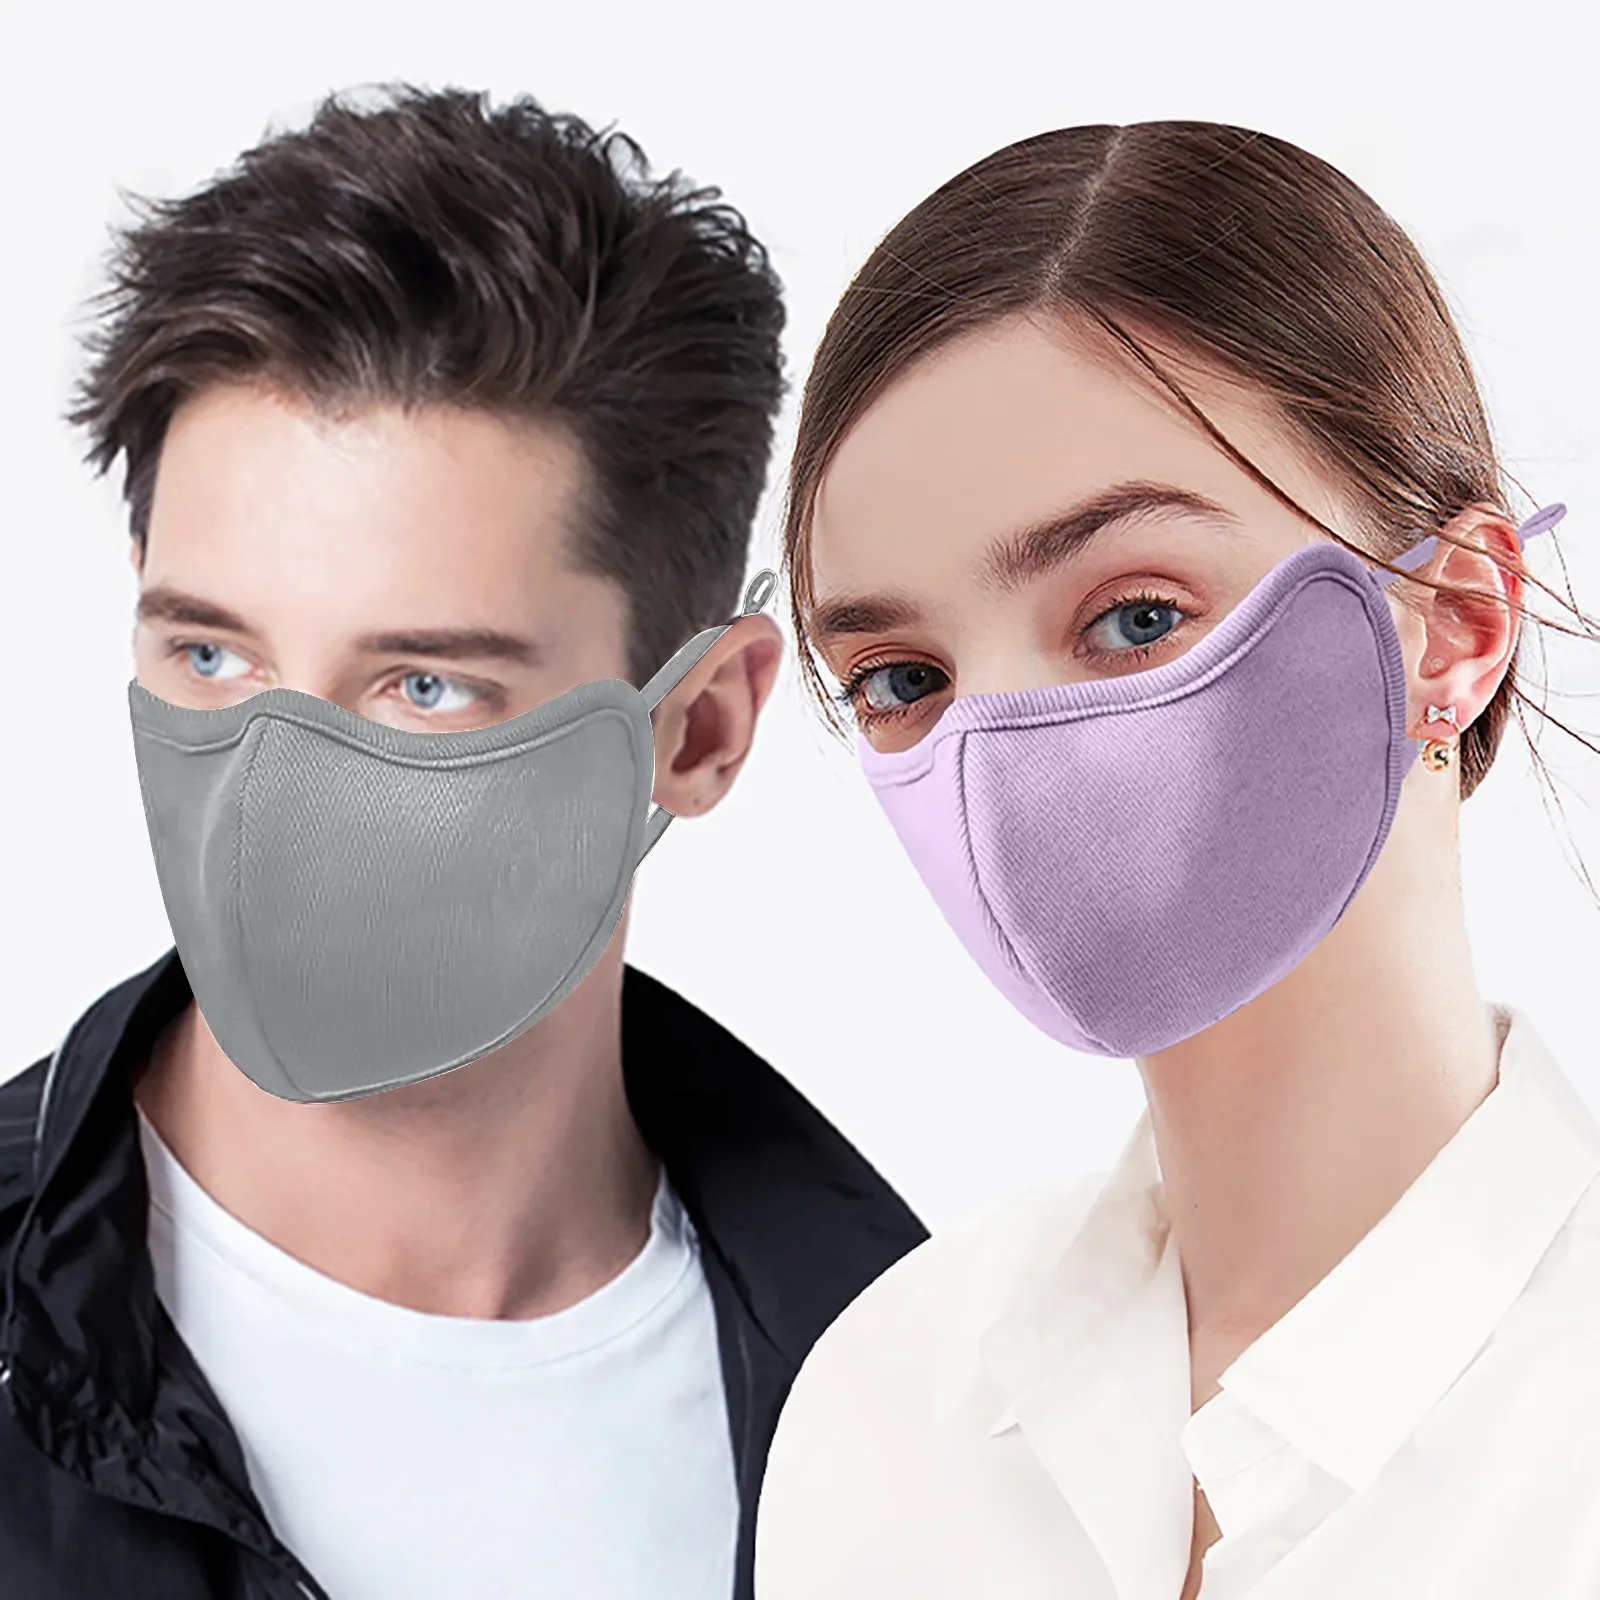 cheap halloween costumes Halloween Cosplay 2pcs Adult Protective Mask Anti Dust Mouth Mask Cotton Masks Washable Reusable Adjustable Face Mask Cubrebocas easy mens halloween costumes